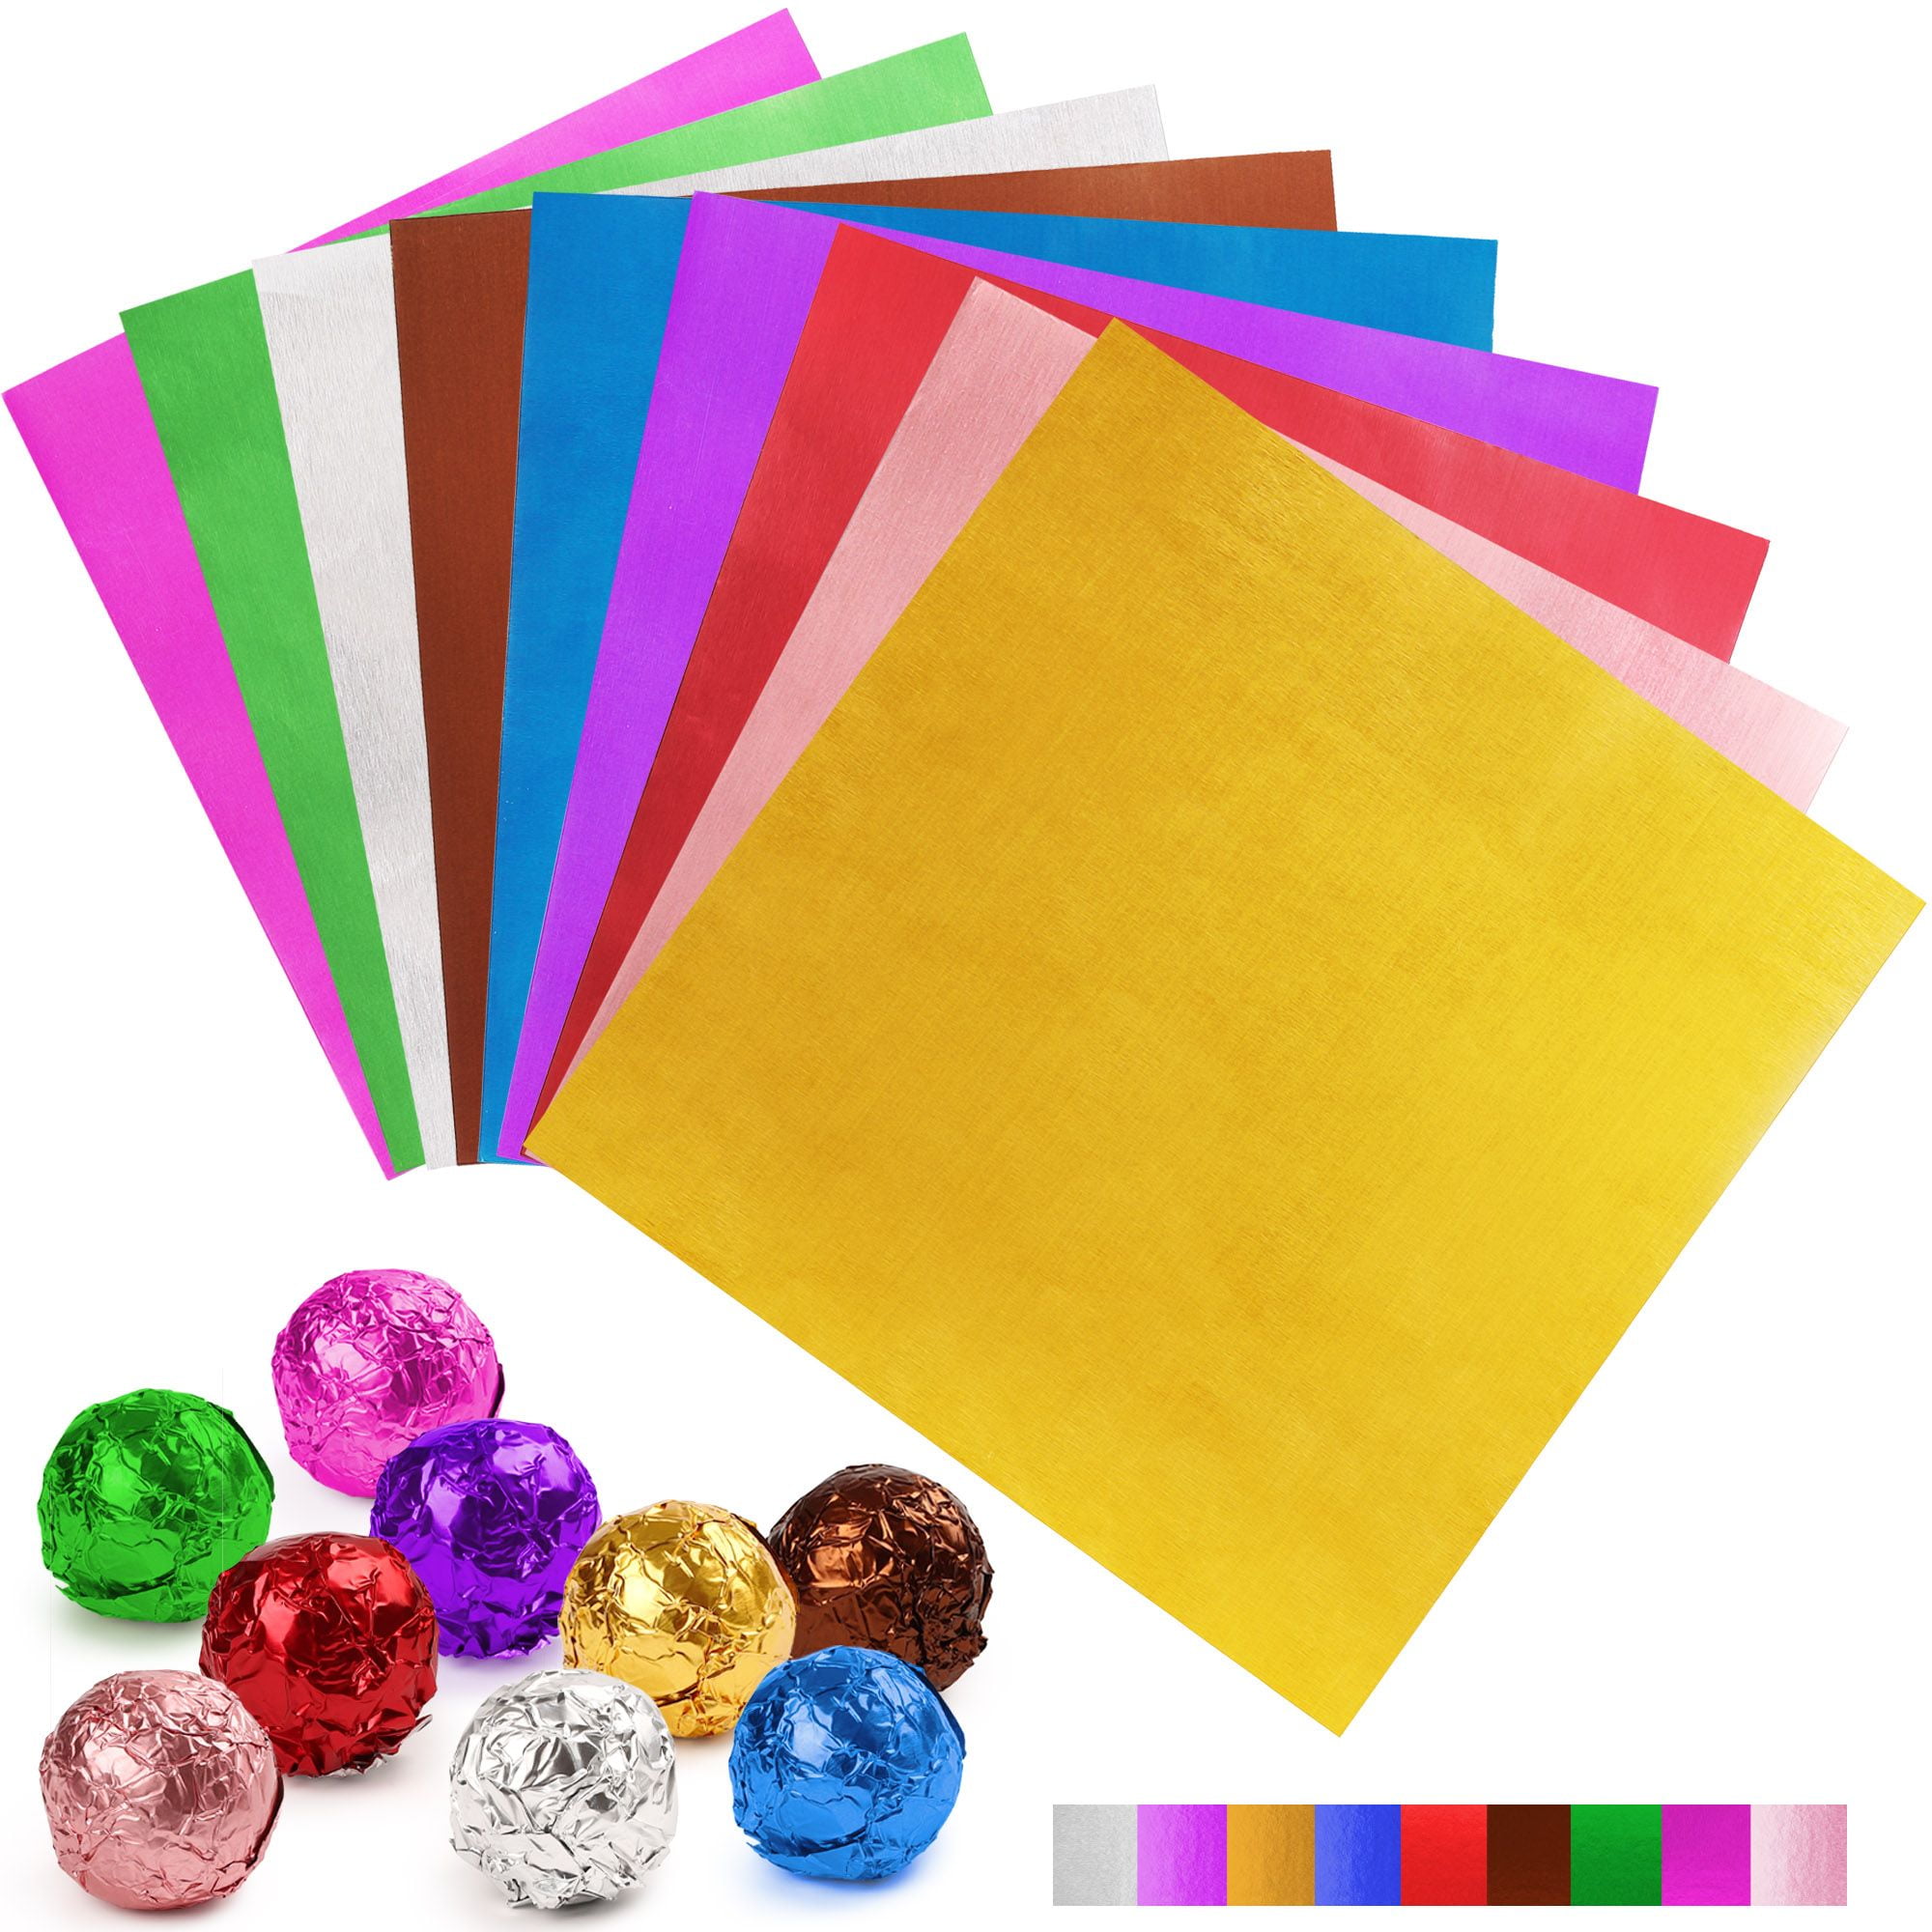 40-50 Square Foil Wrappers in Turquoise for Chocolates & Sweets 80mm x 80mm.